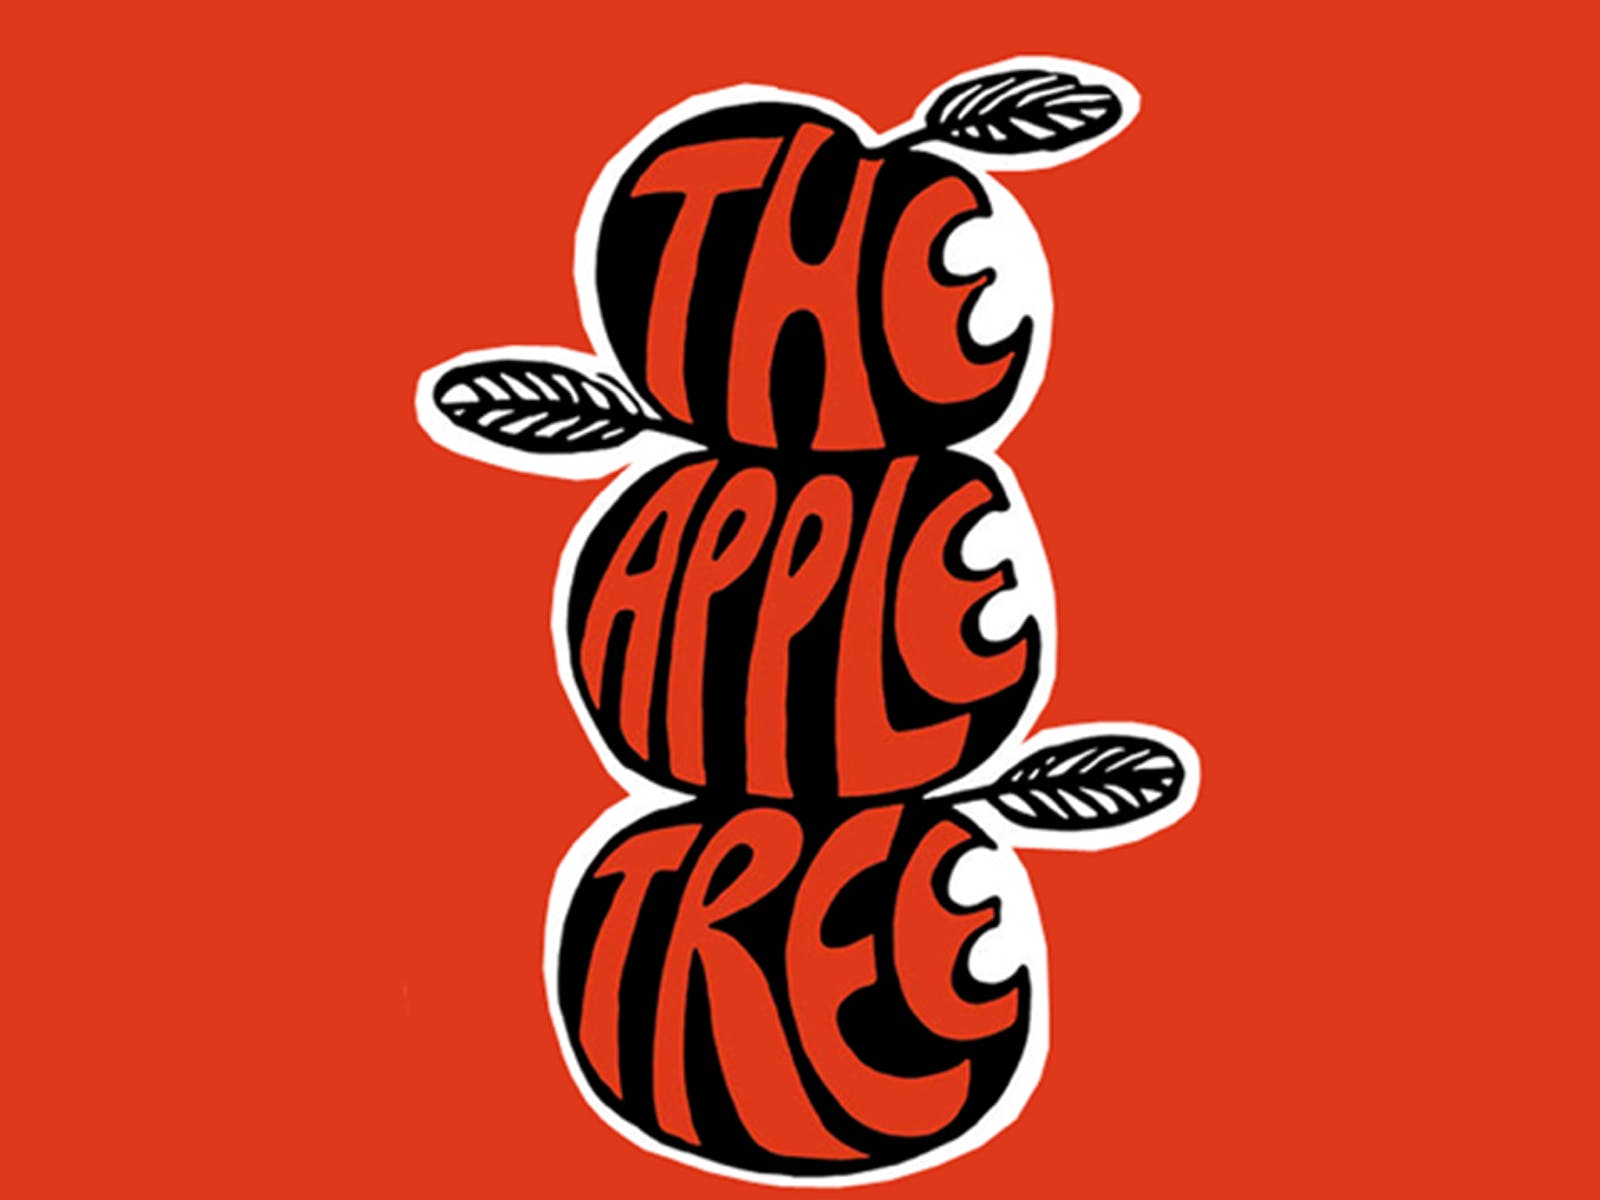 You are currently viewing The Apple Tree